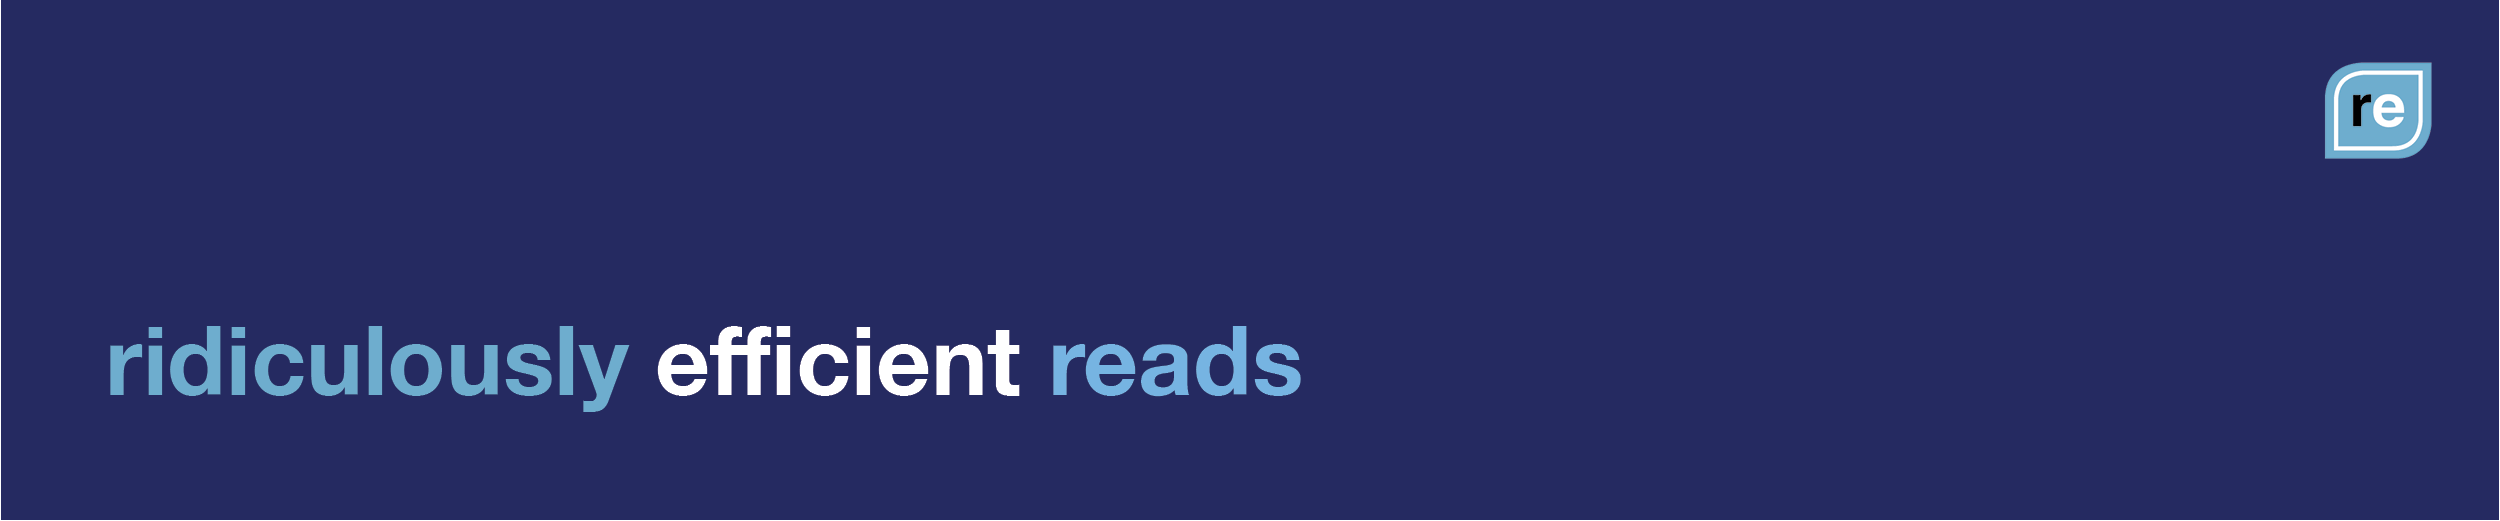 ridiculously efficient reads banner.png